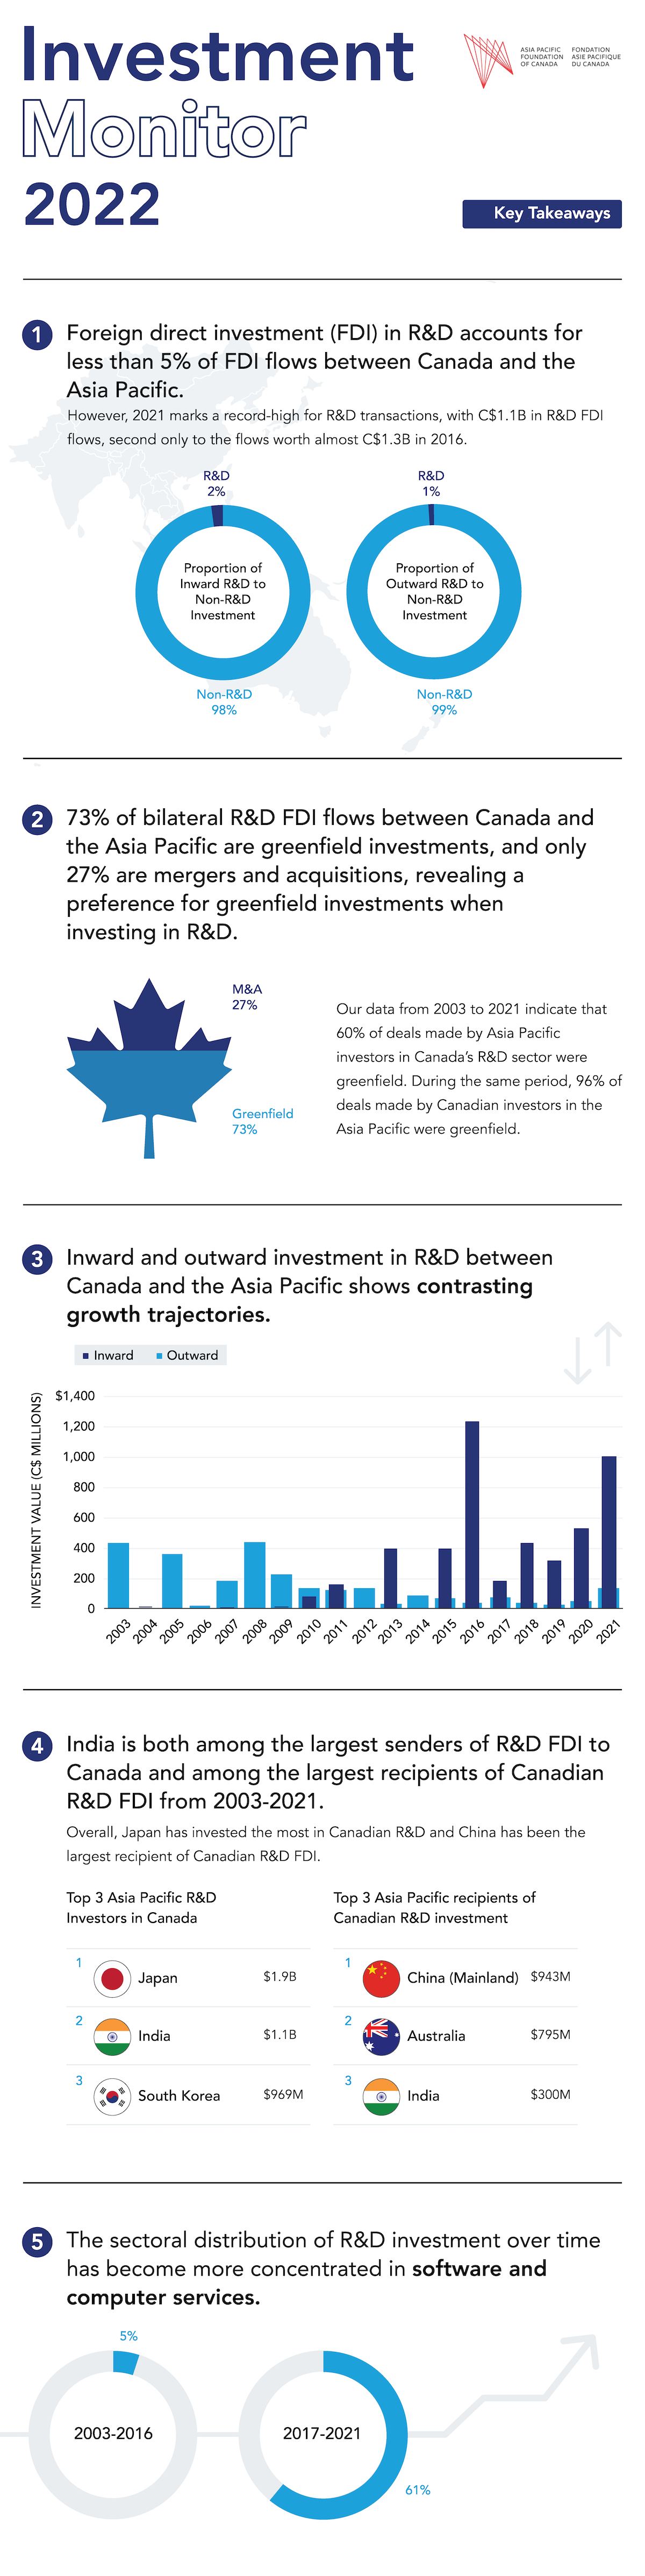 Investment Monitor 2022 Report on R&D Infographic